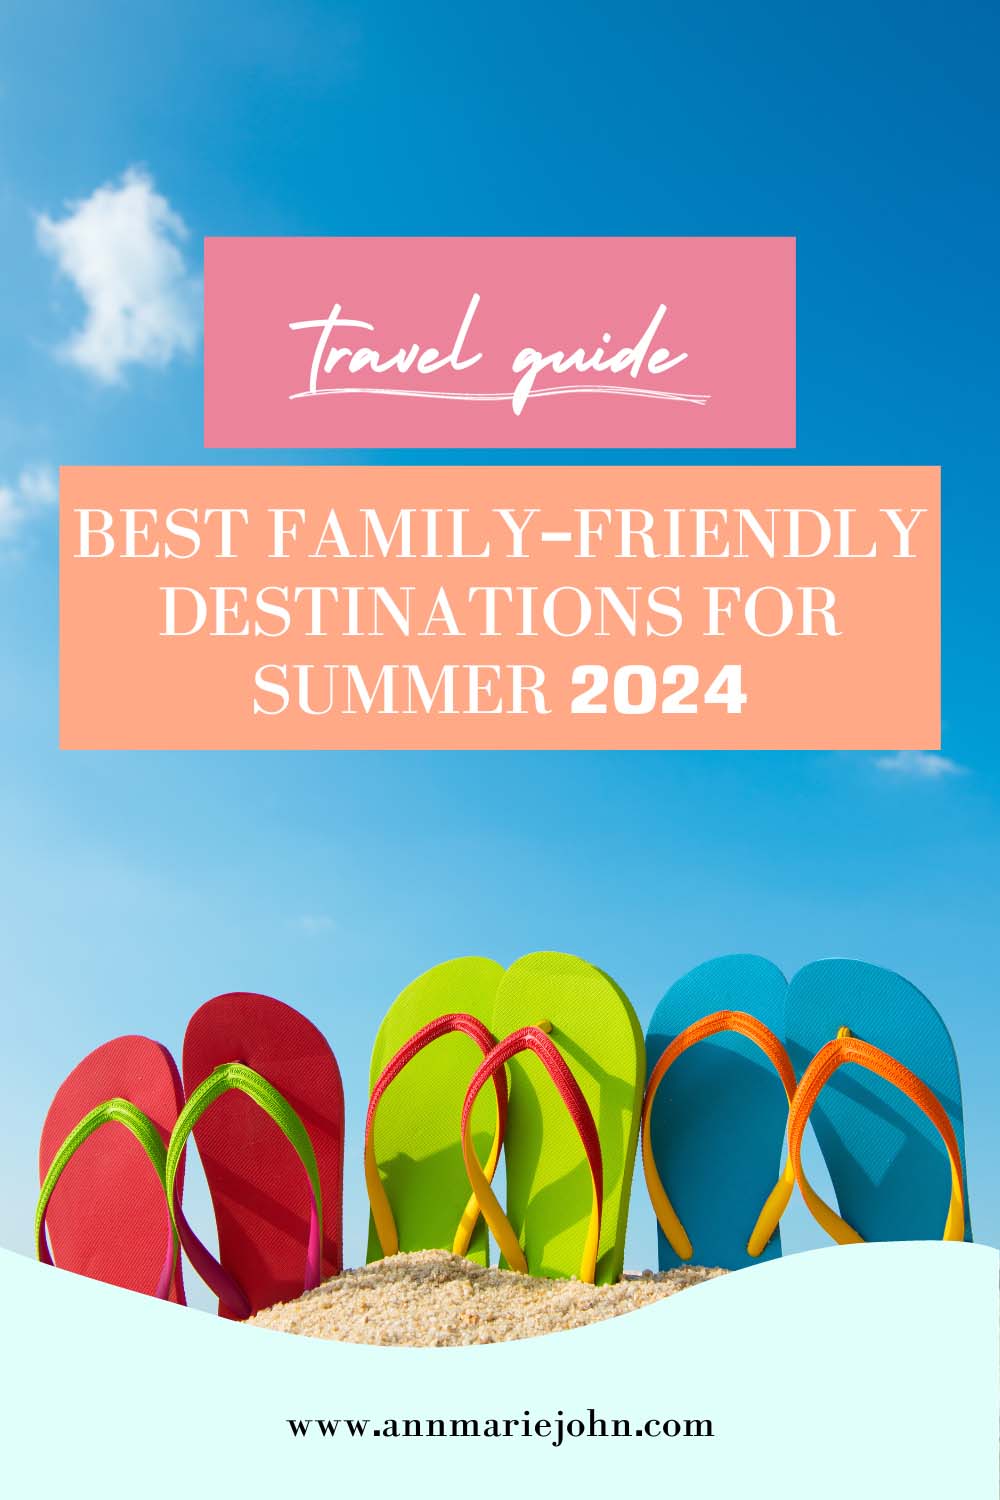 Best Family-Friendly Destinations for Summer 2024